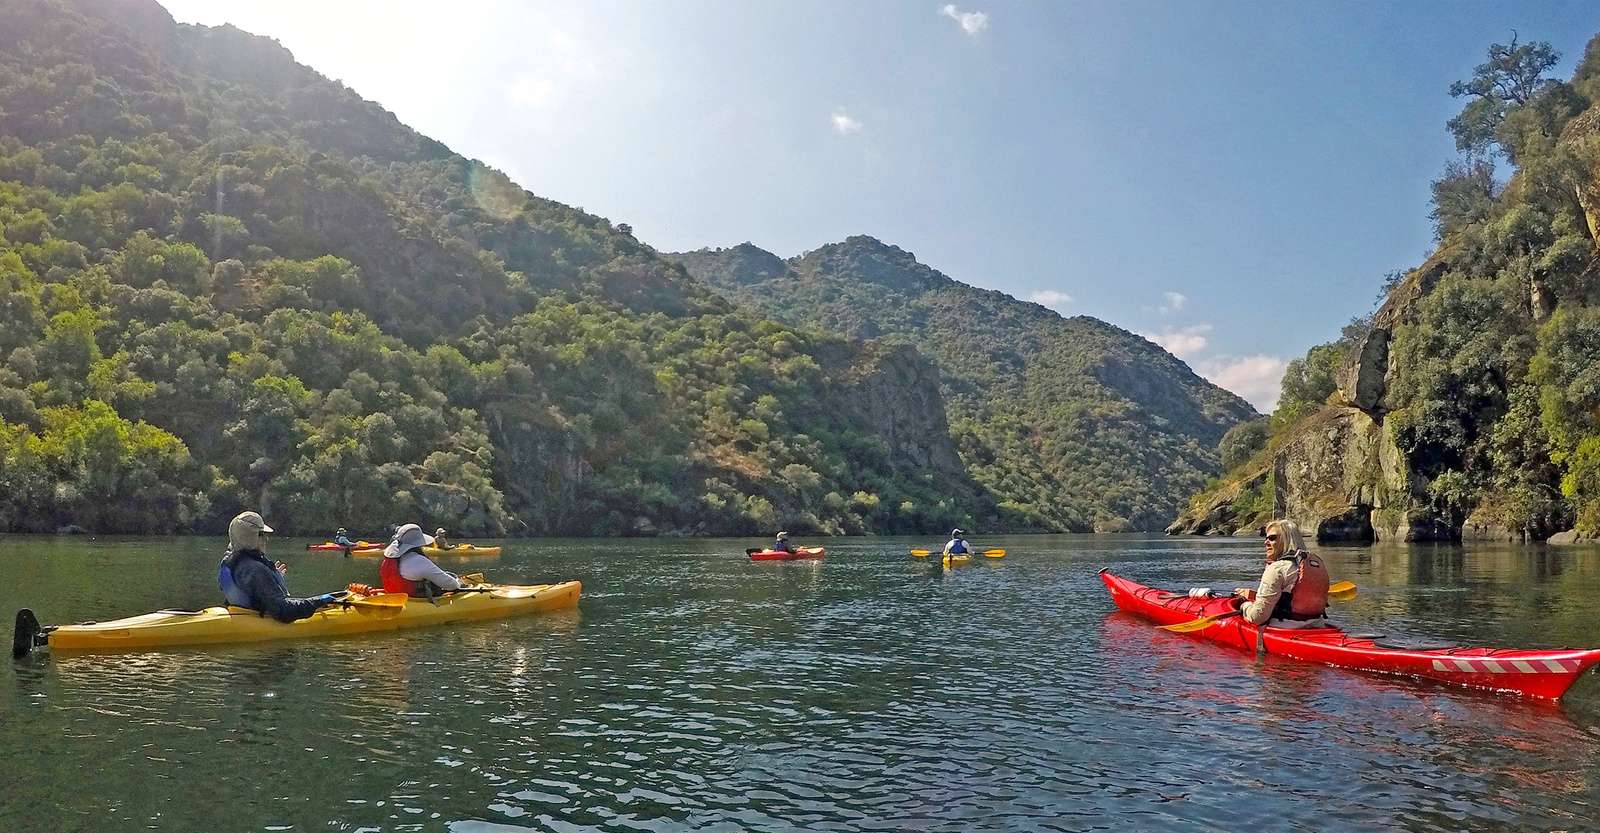 Nat Hab guests kayaking, Douro River, Douro Valley, Portugal.